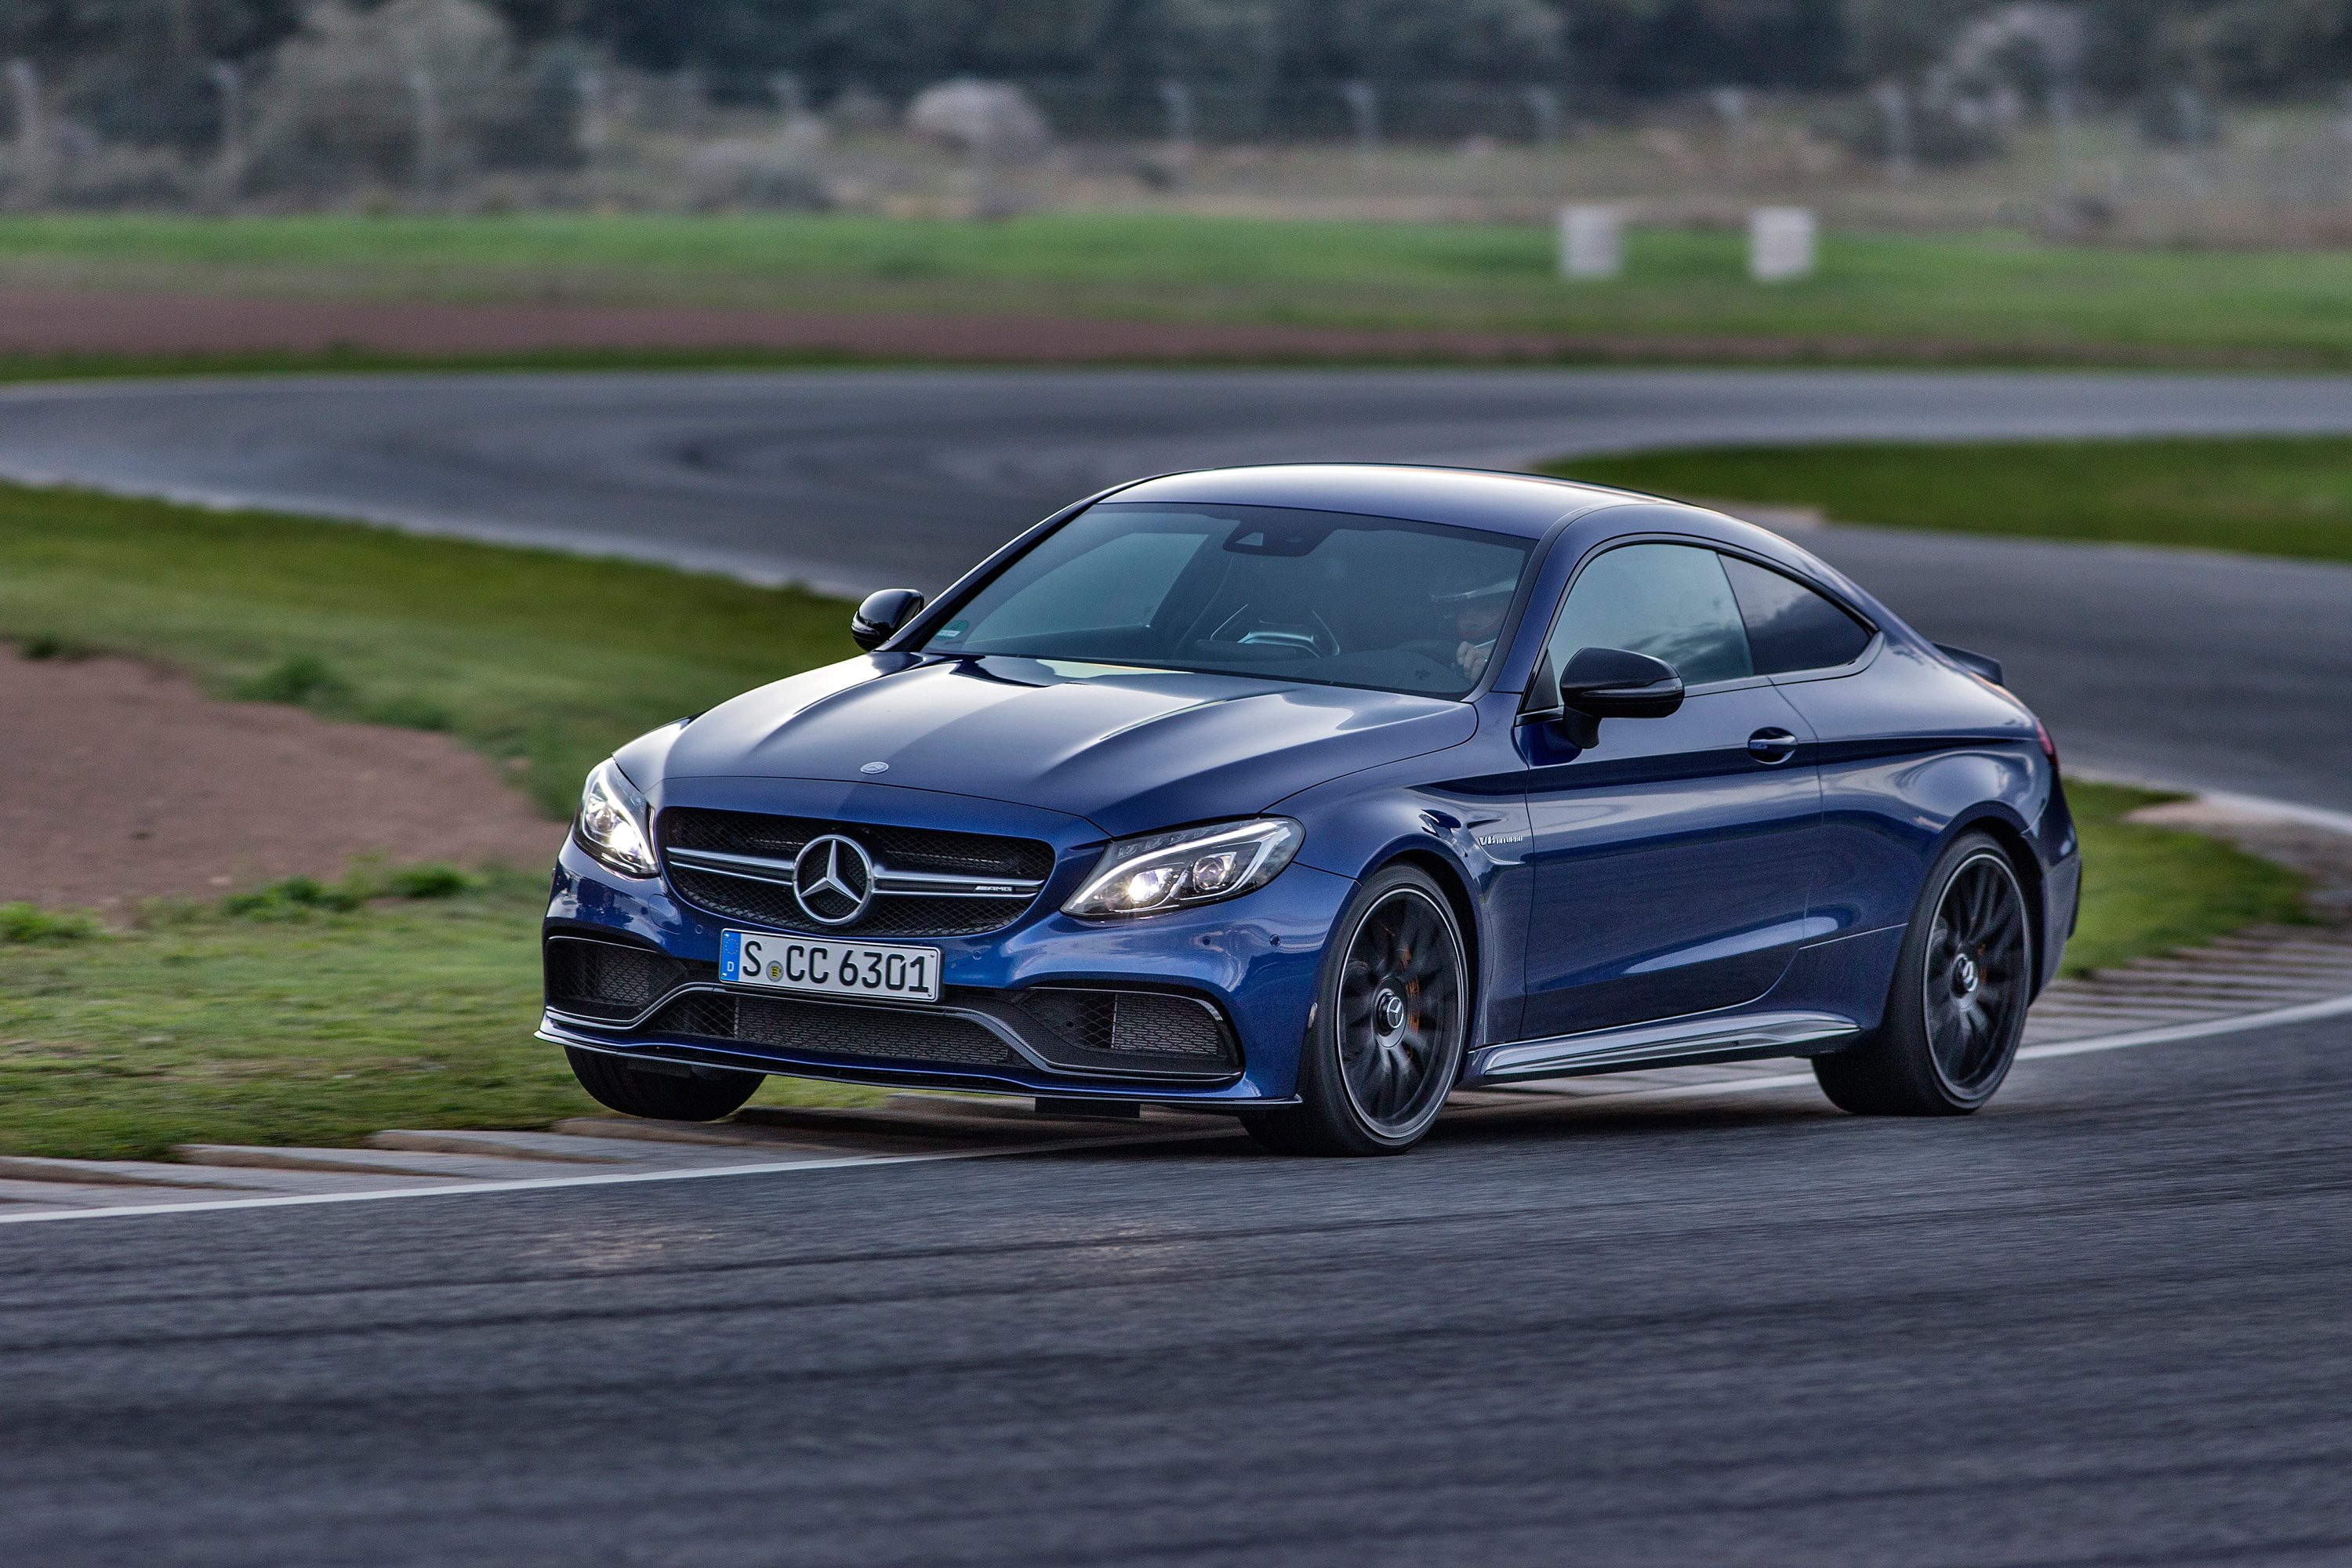 MercedesAMG C63 S coupe pricing and specifications photos CarAdvice